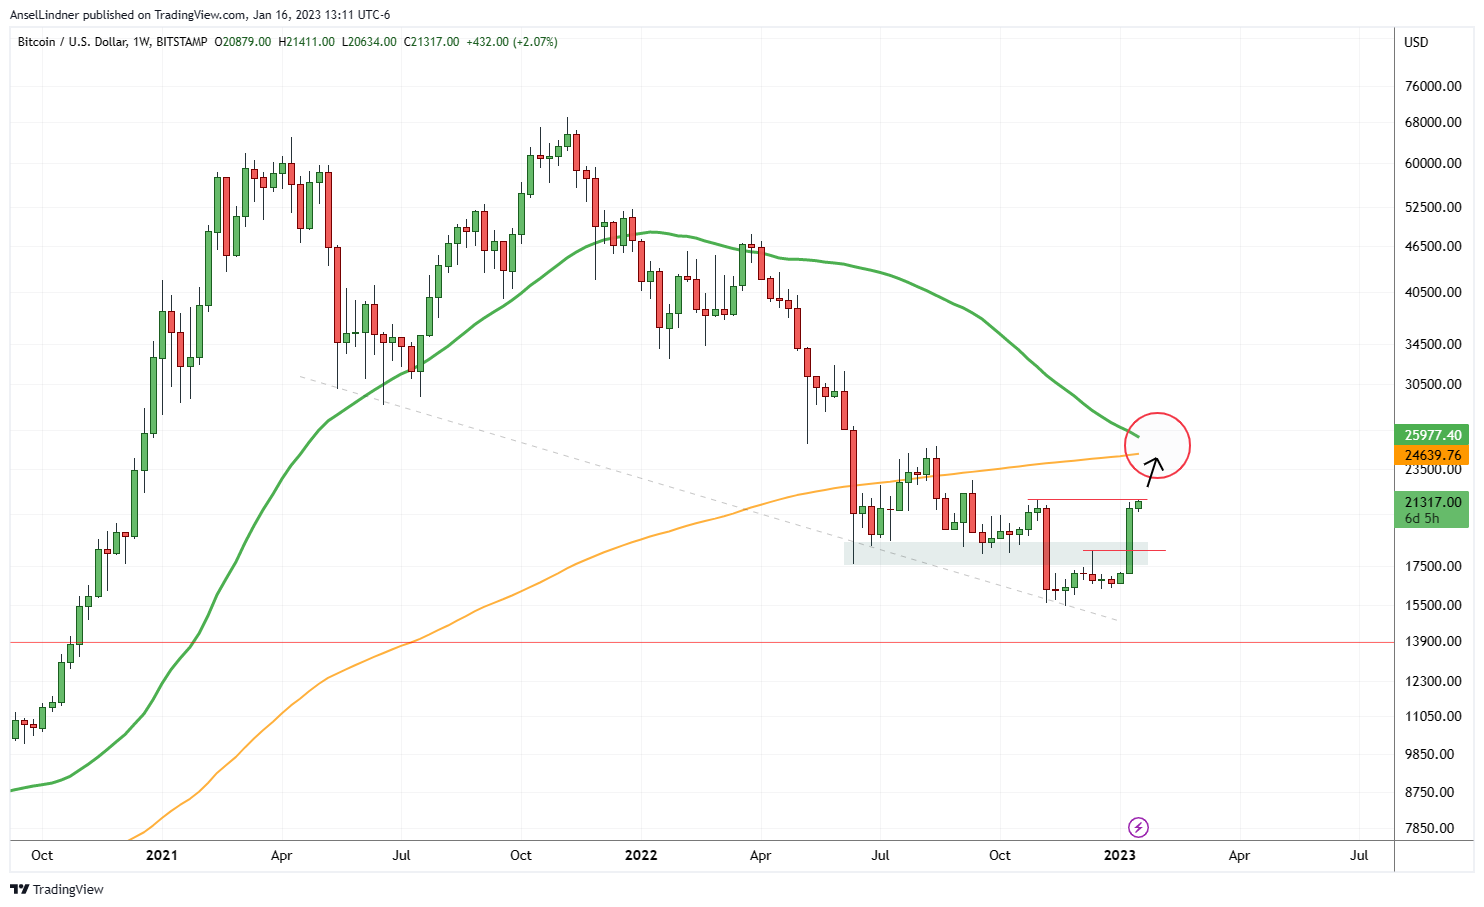 Bitcoin weekly chart with 50 and 200-day moving averages